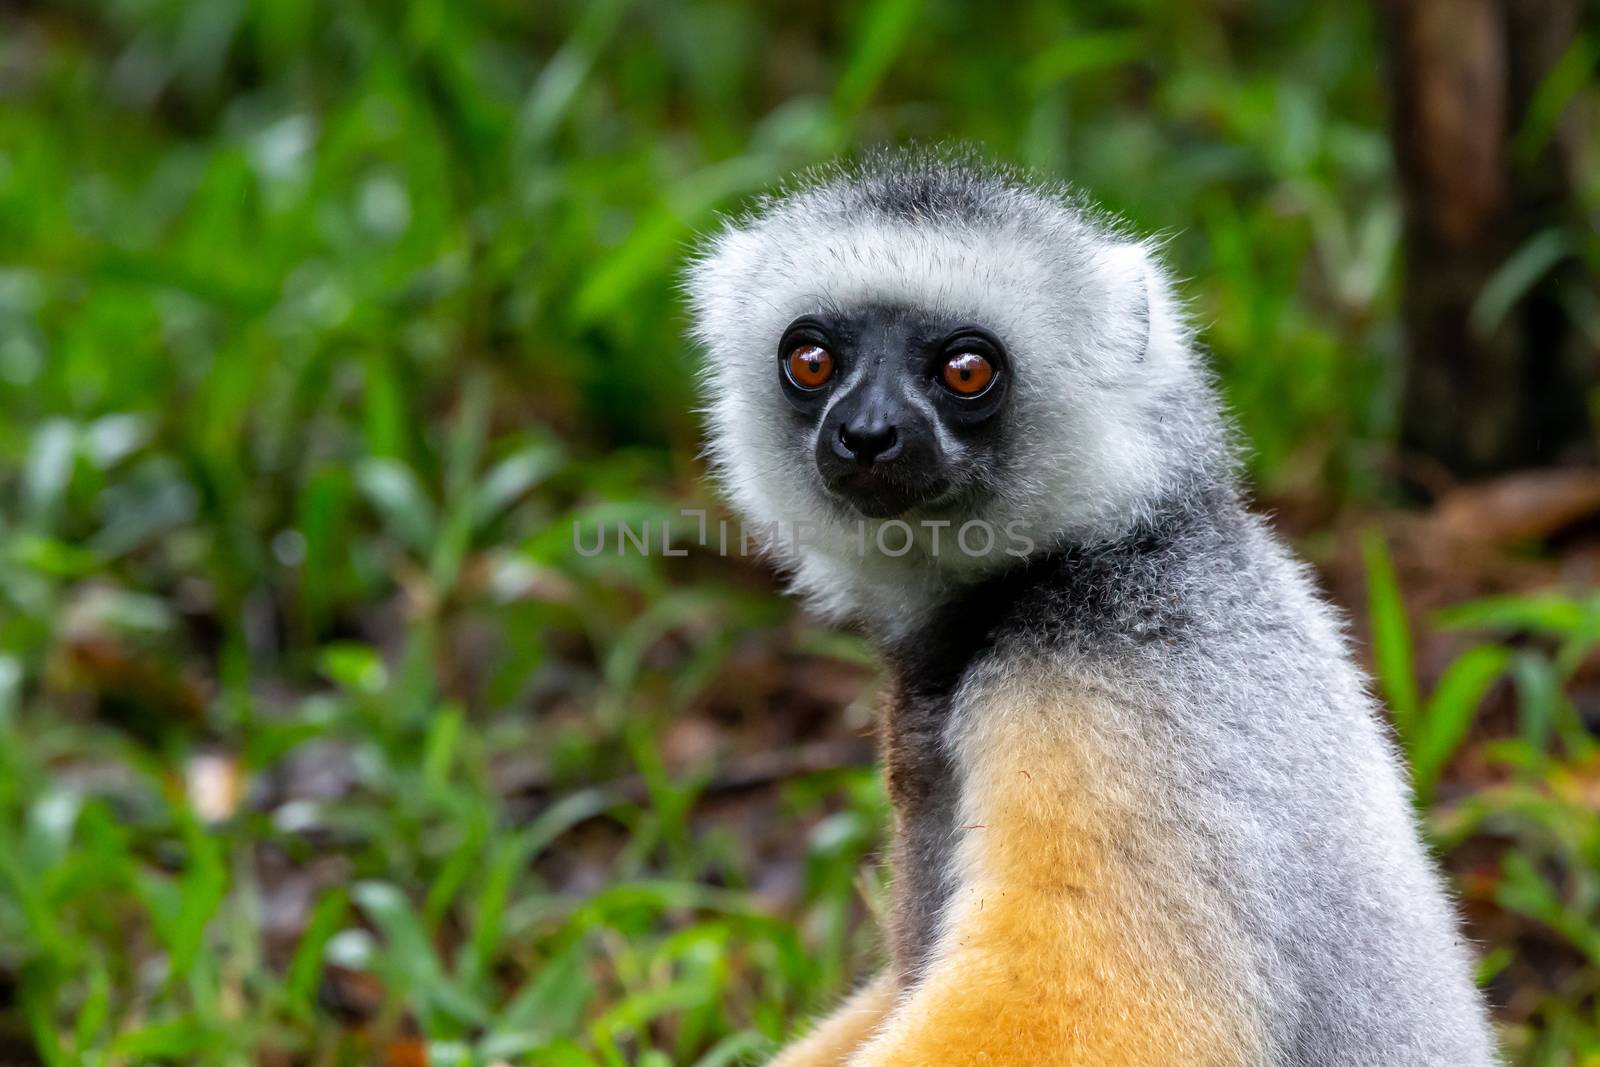 One Sifaka lemur sits in the grass and watches what happens in the area